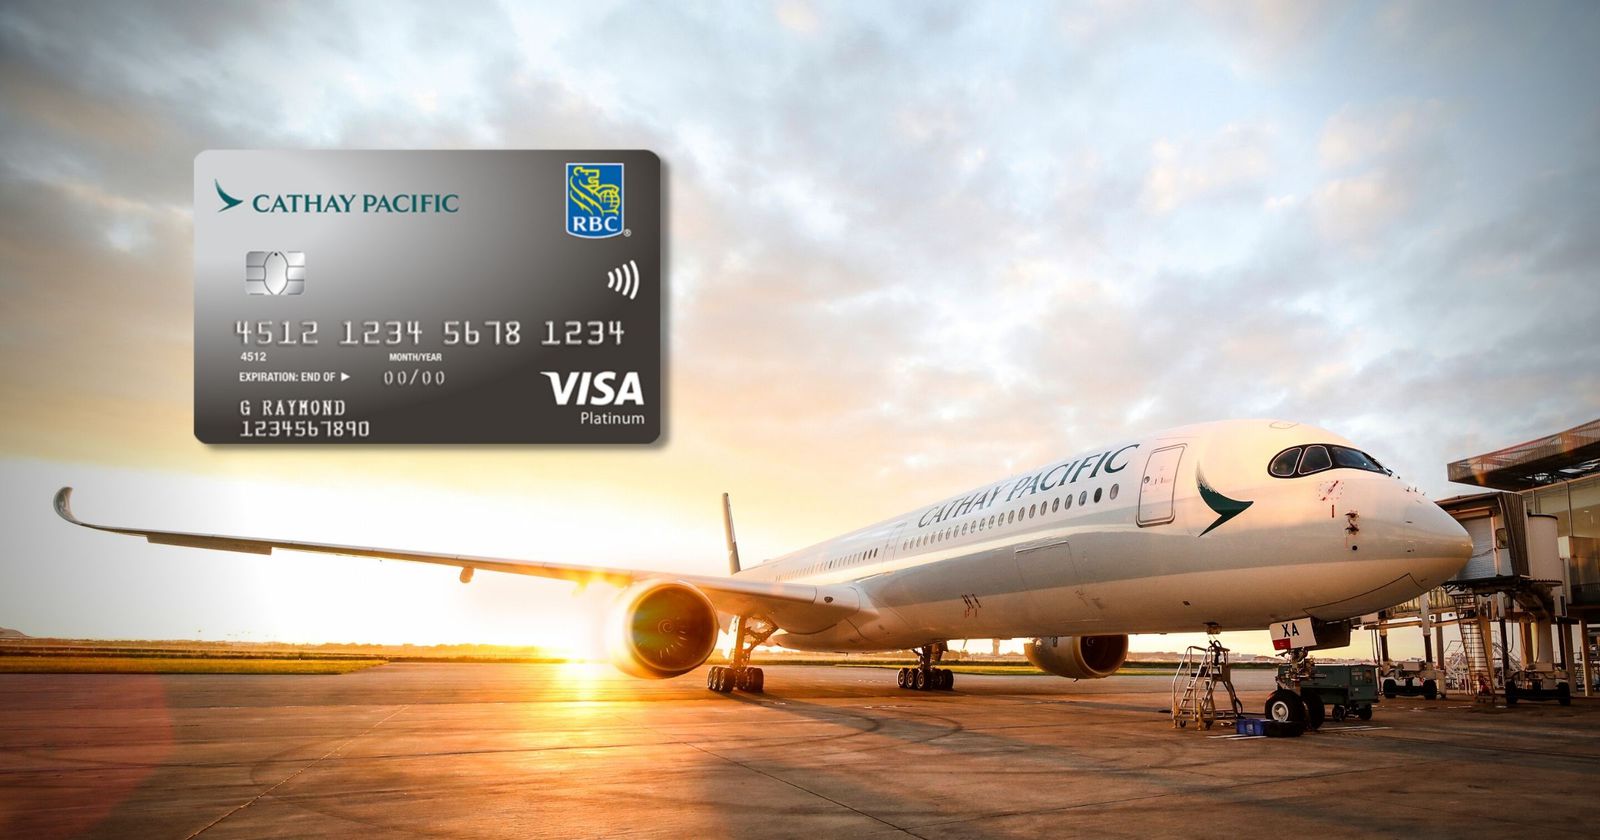 cathay pacific rbc featured